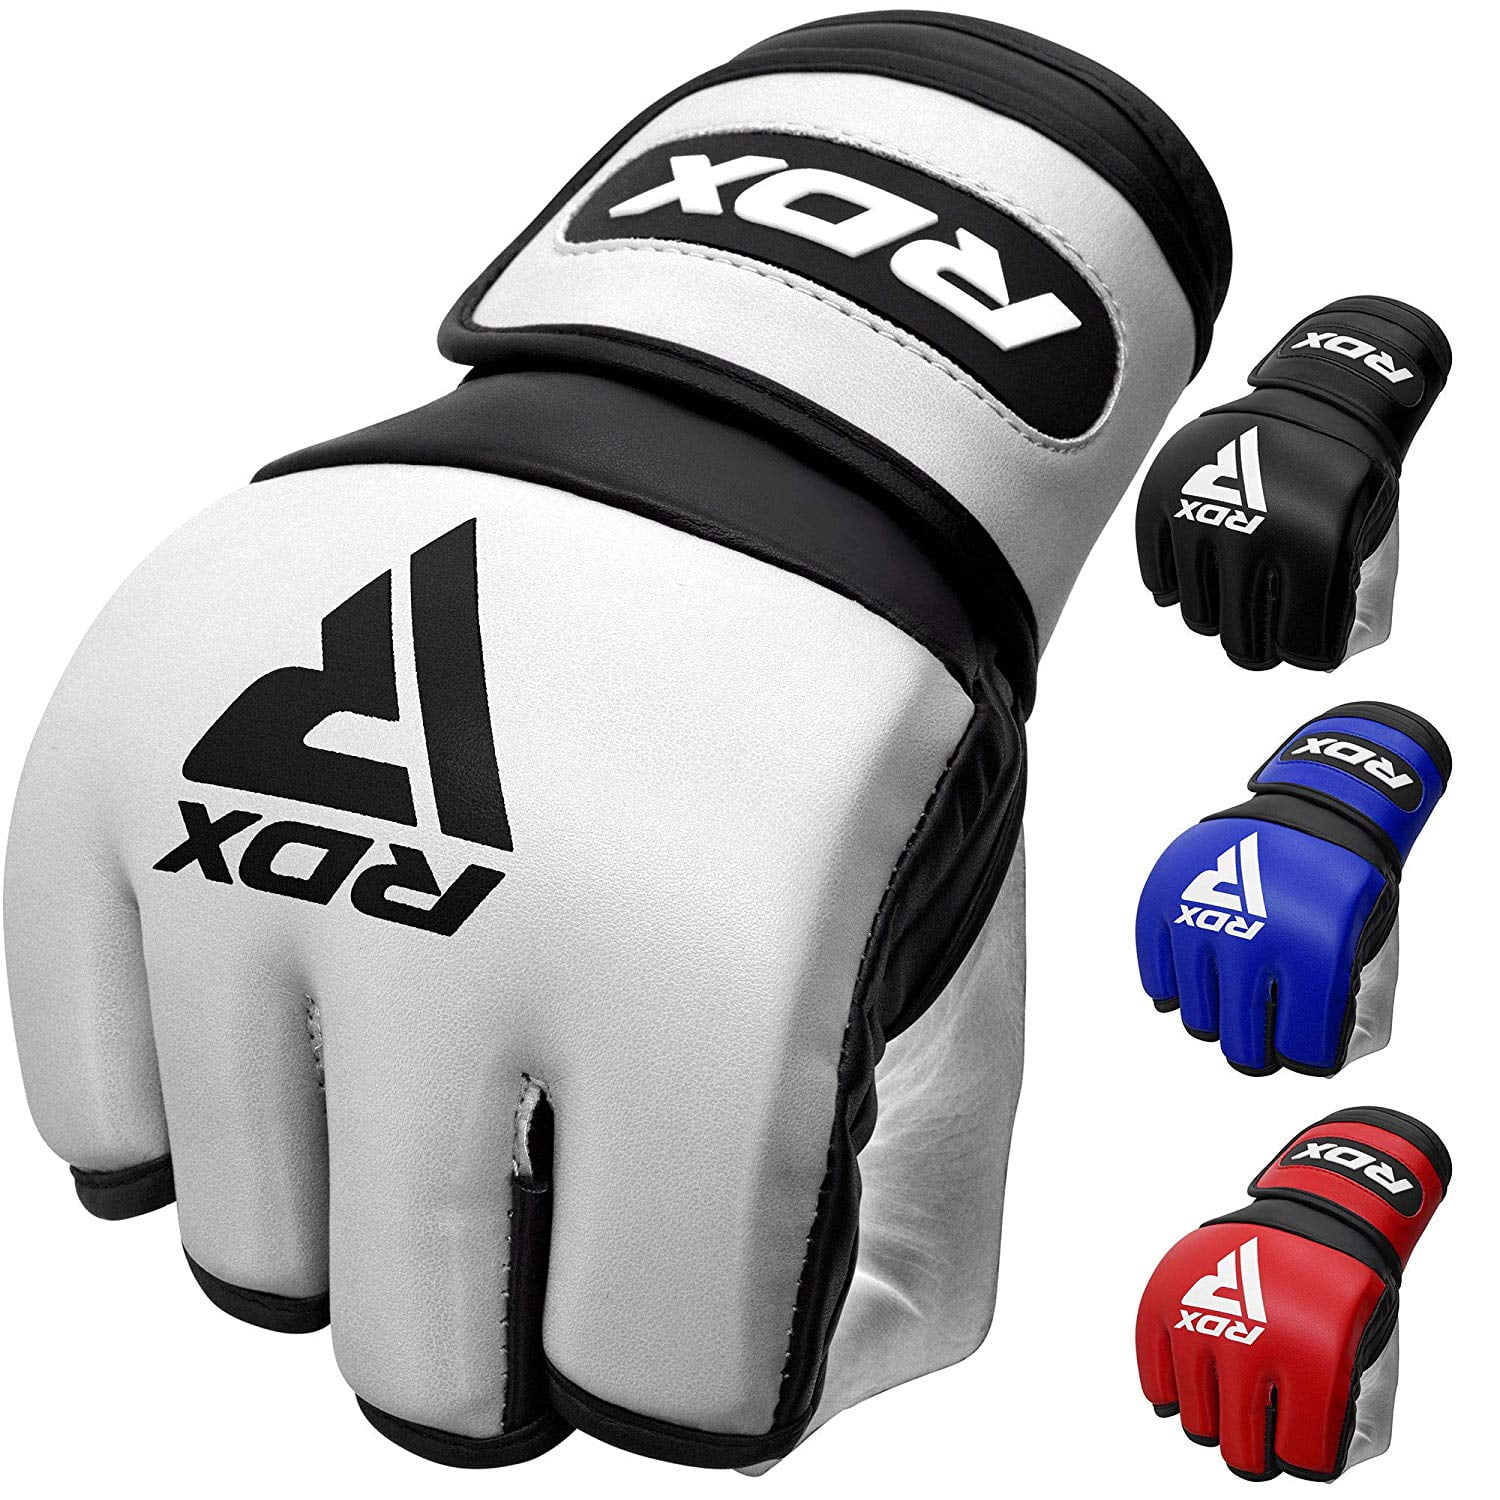 RDX MMA Gloves Sparring Martial Arts Muay Thai Grappling Cage Fighting Training 